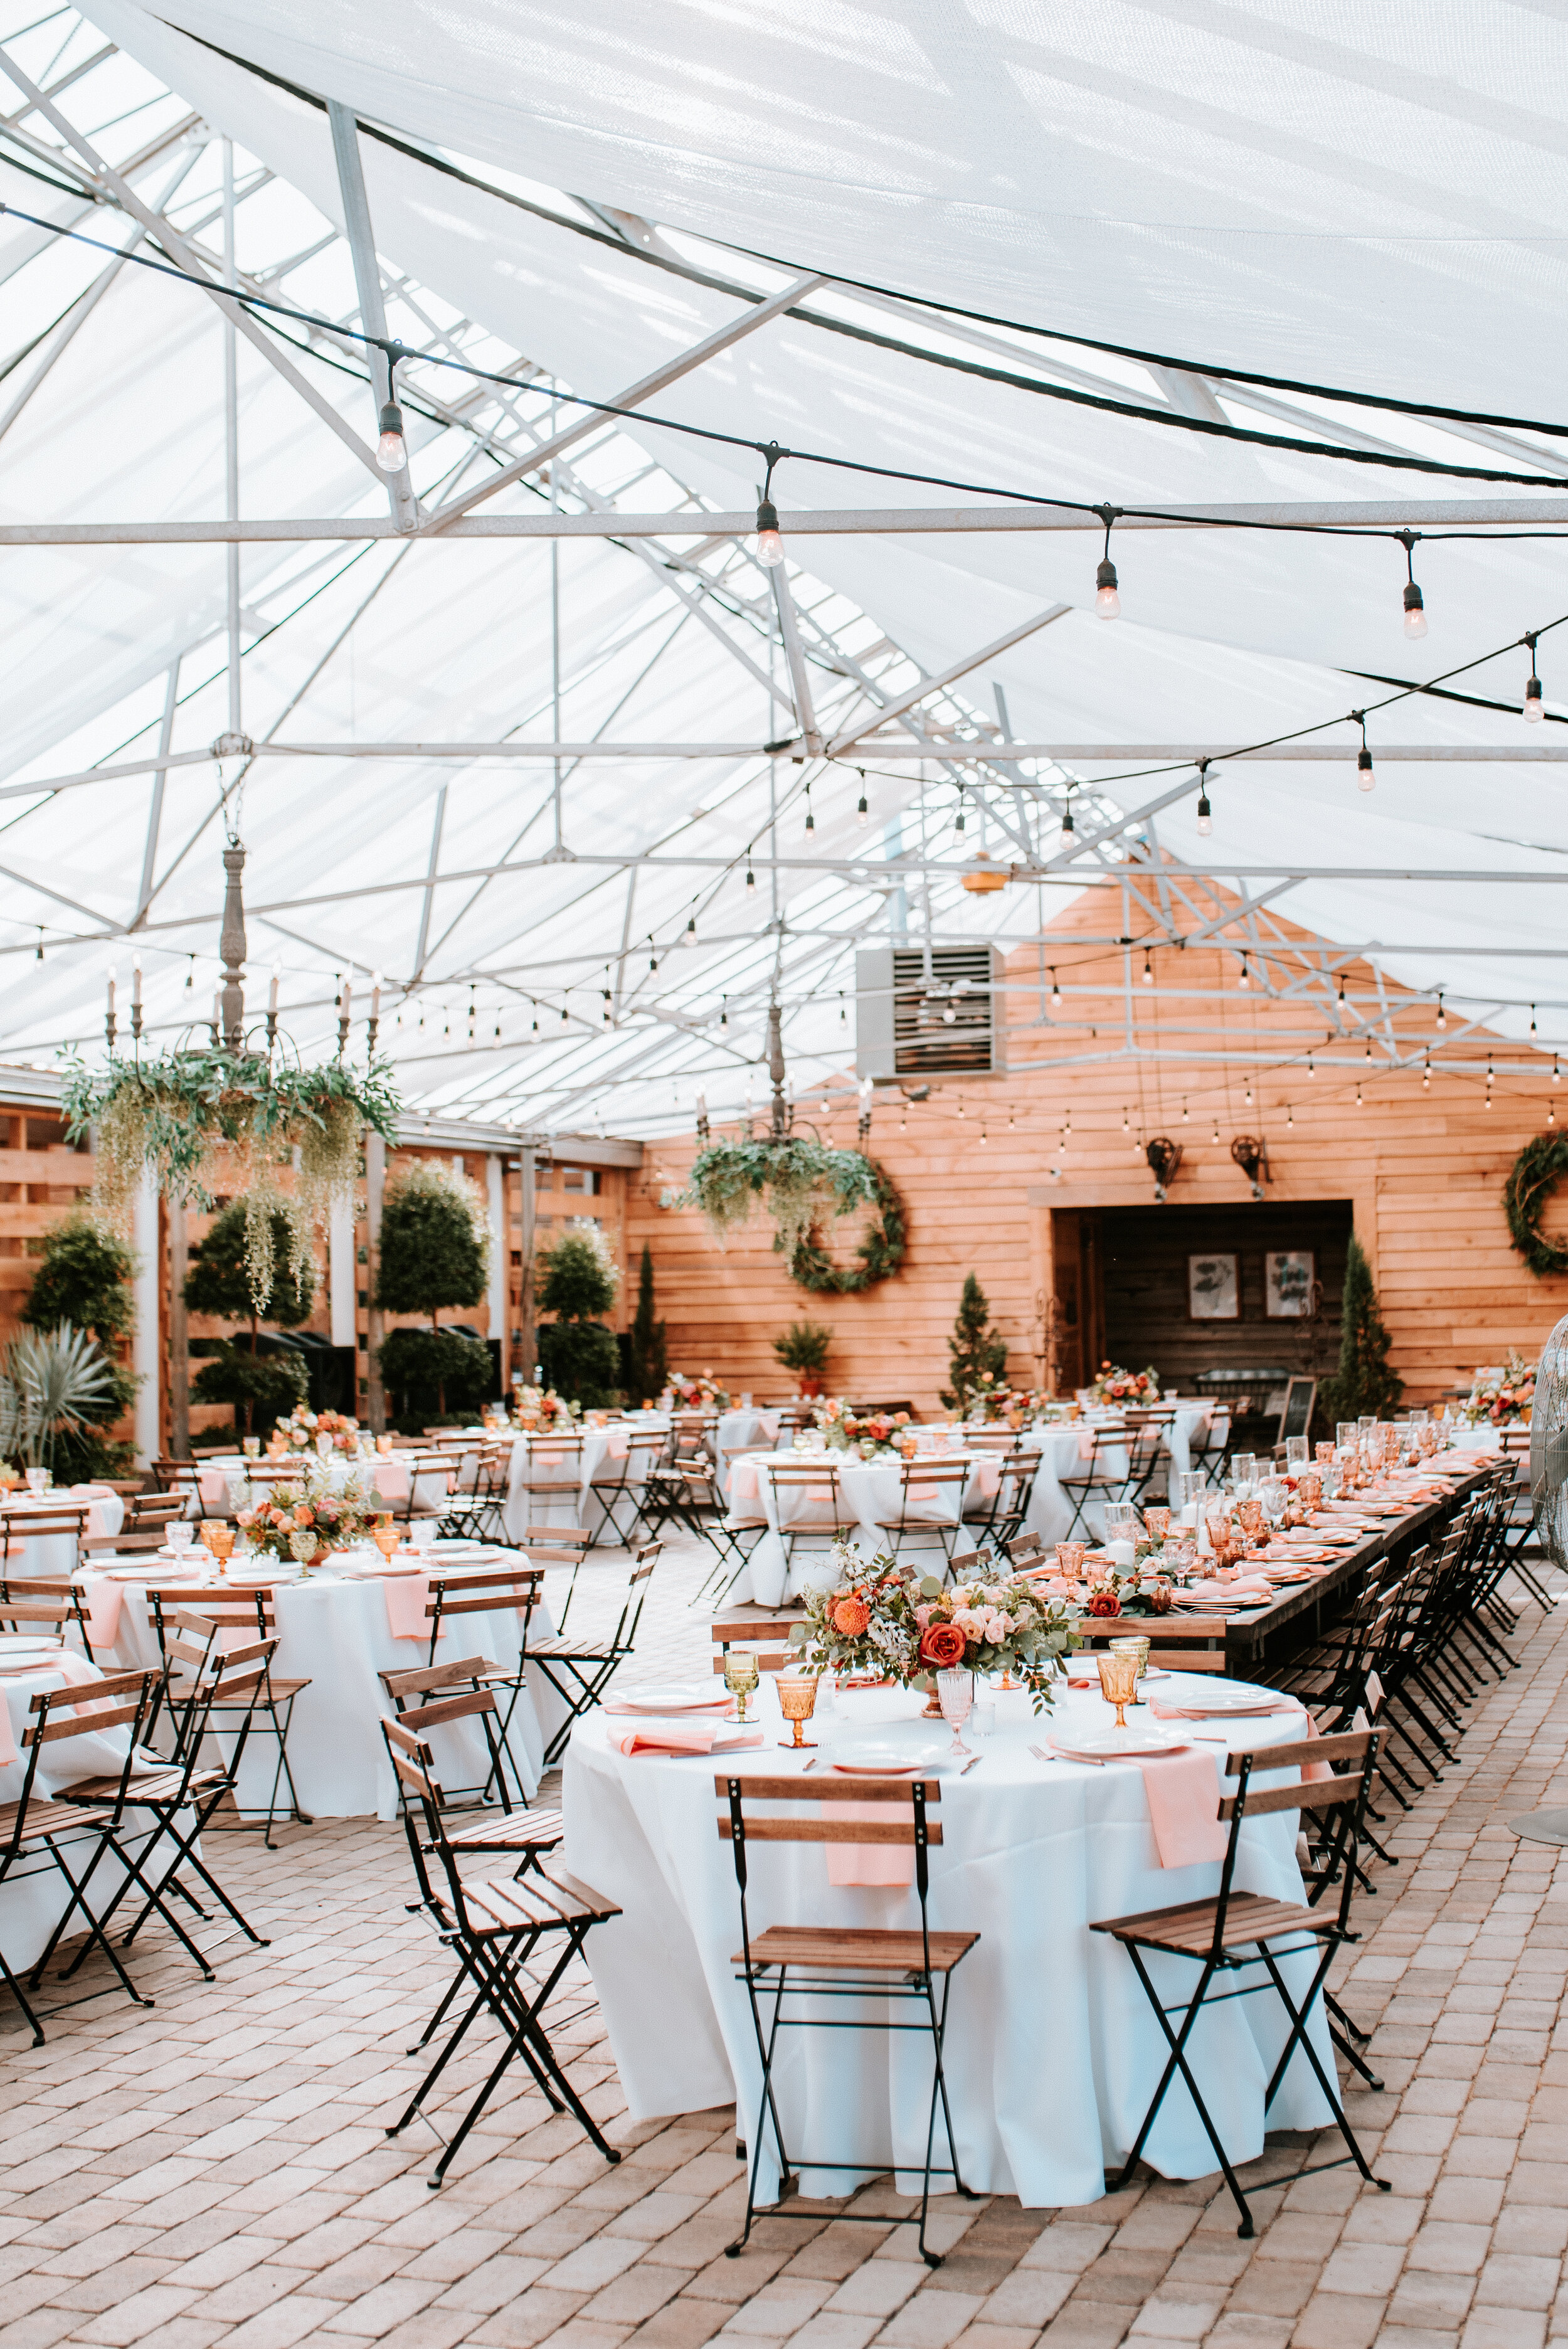 Greenhouse wedding reception with orange and peach flower arrangements of garden roses, ranunculus, berries, and wildflowers with asymmetrical, trailing greenery. Nashville wedding floral design.